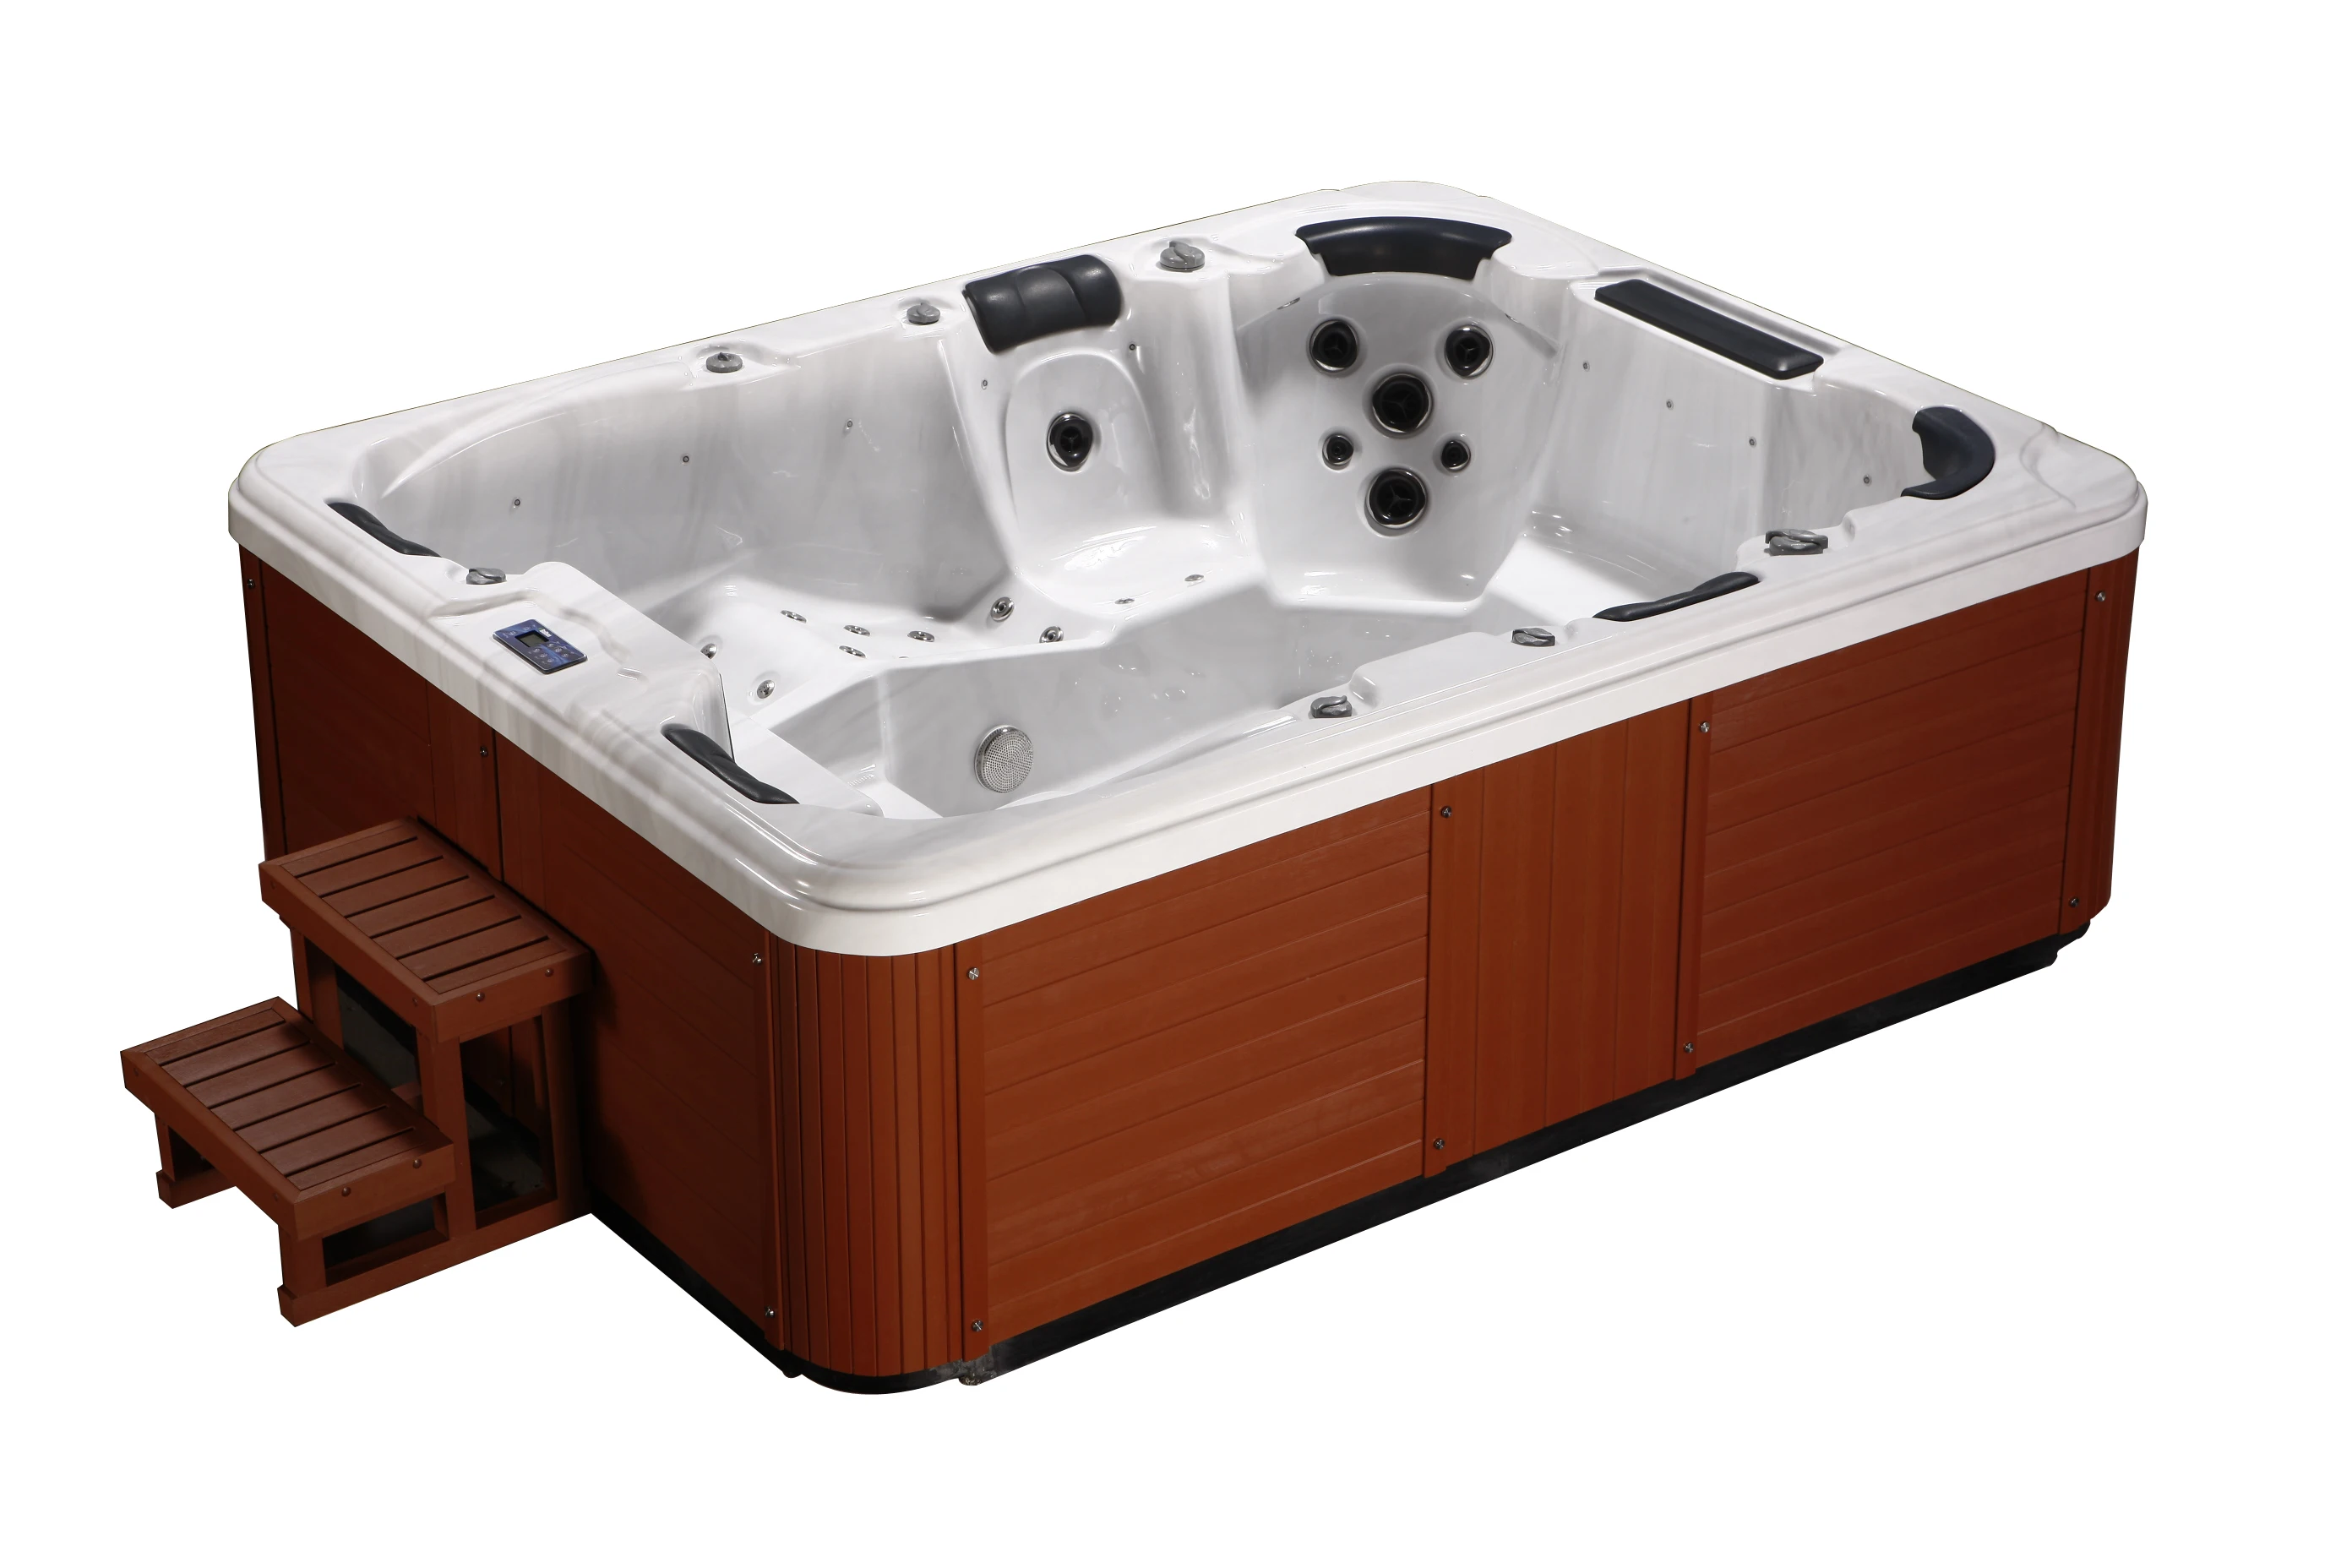 Wholesale 6 Persons Deluxe Outdoor Hydro Cold Balboa Hot Tub With Tv Spa Cover Buy Hot Tub With Tv Balboa Hot Tub Balboa Hot Tubs Spas Product On